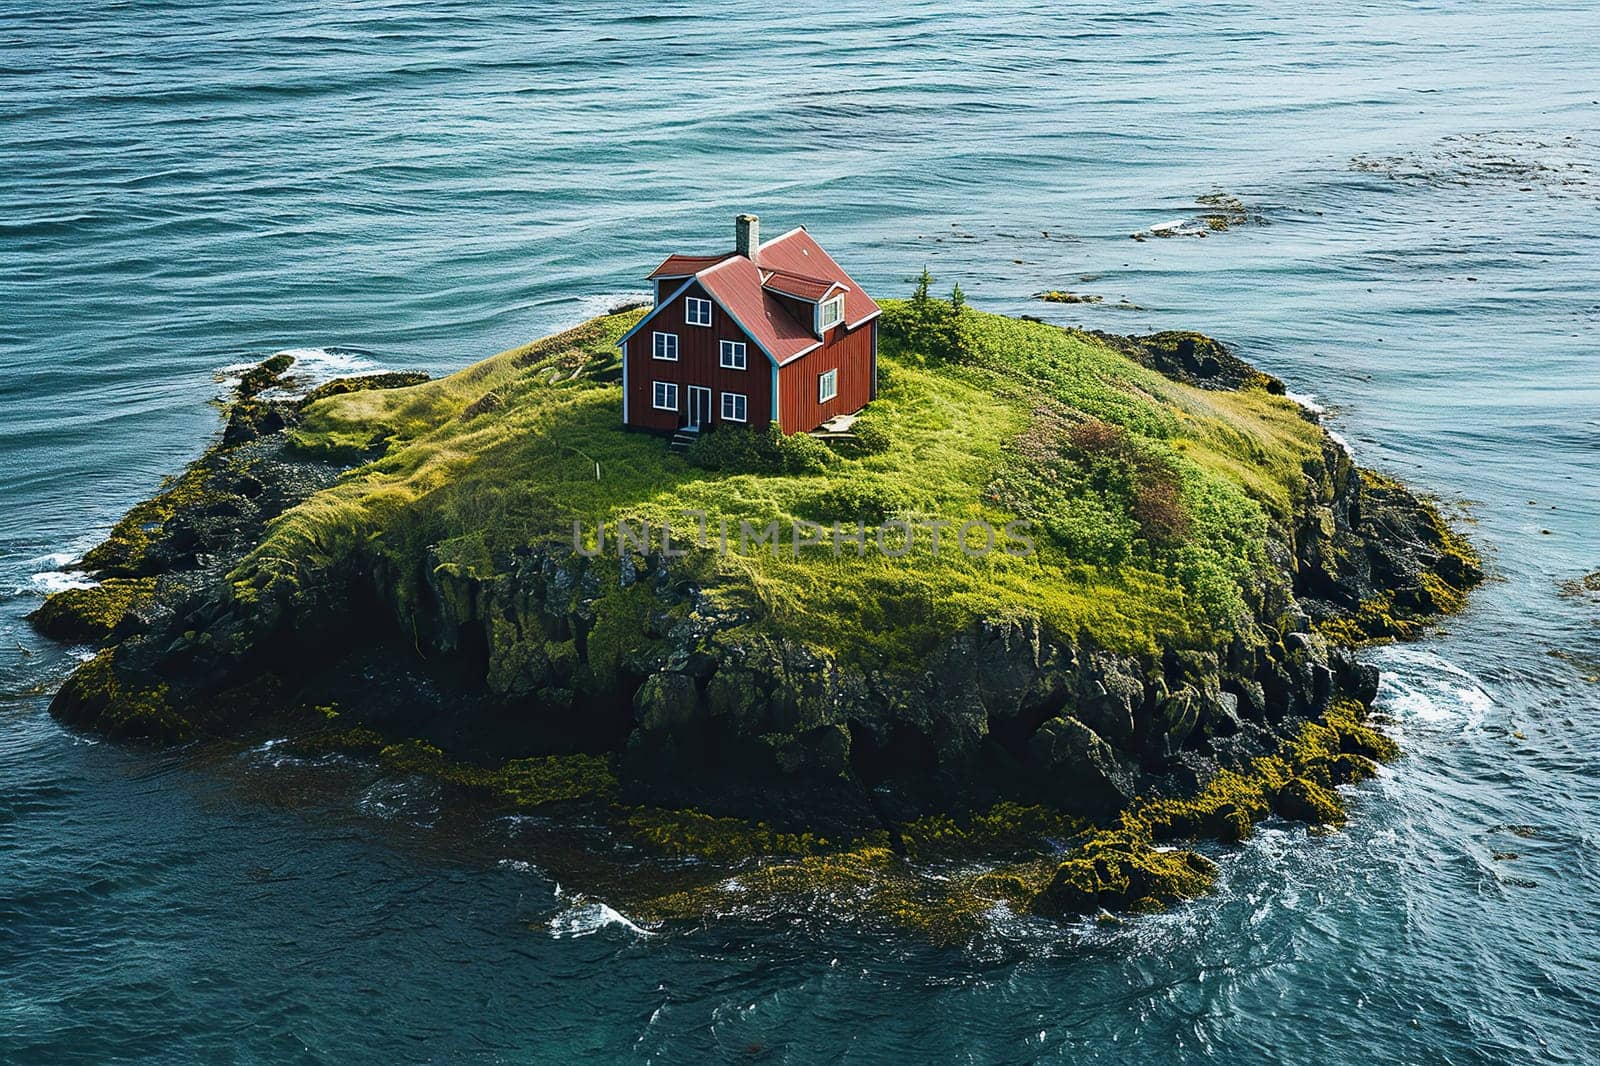 A traditional red Scandinavian fisherman's house on a small island in the middle of the ocean.